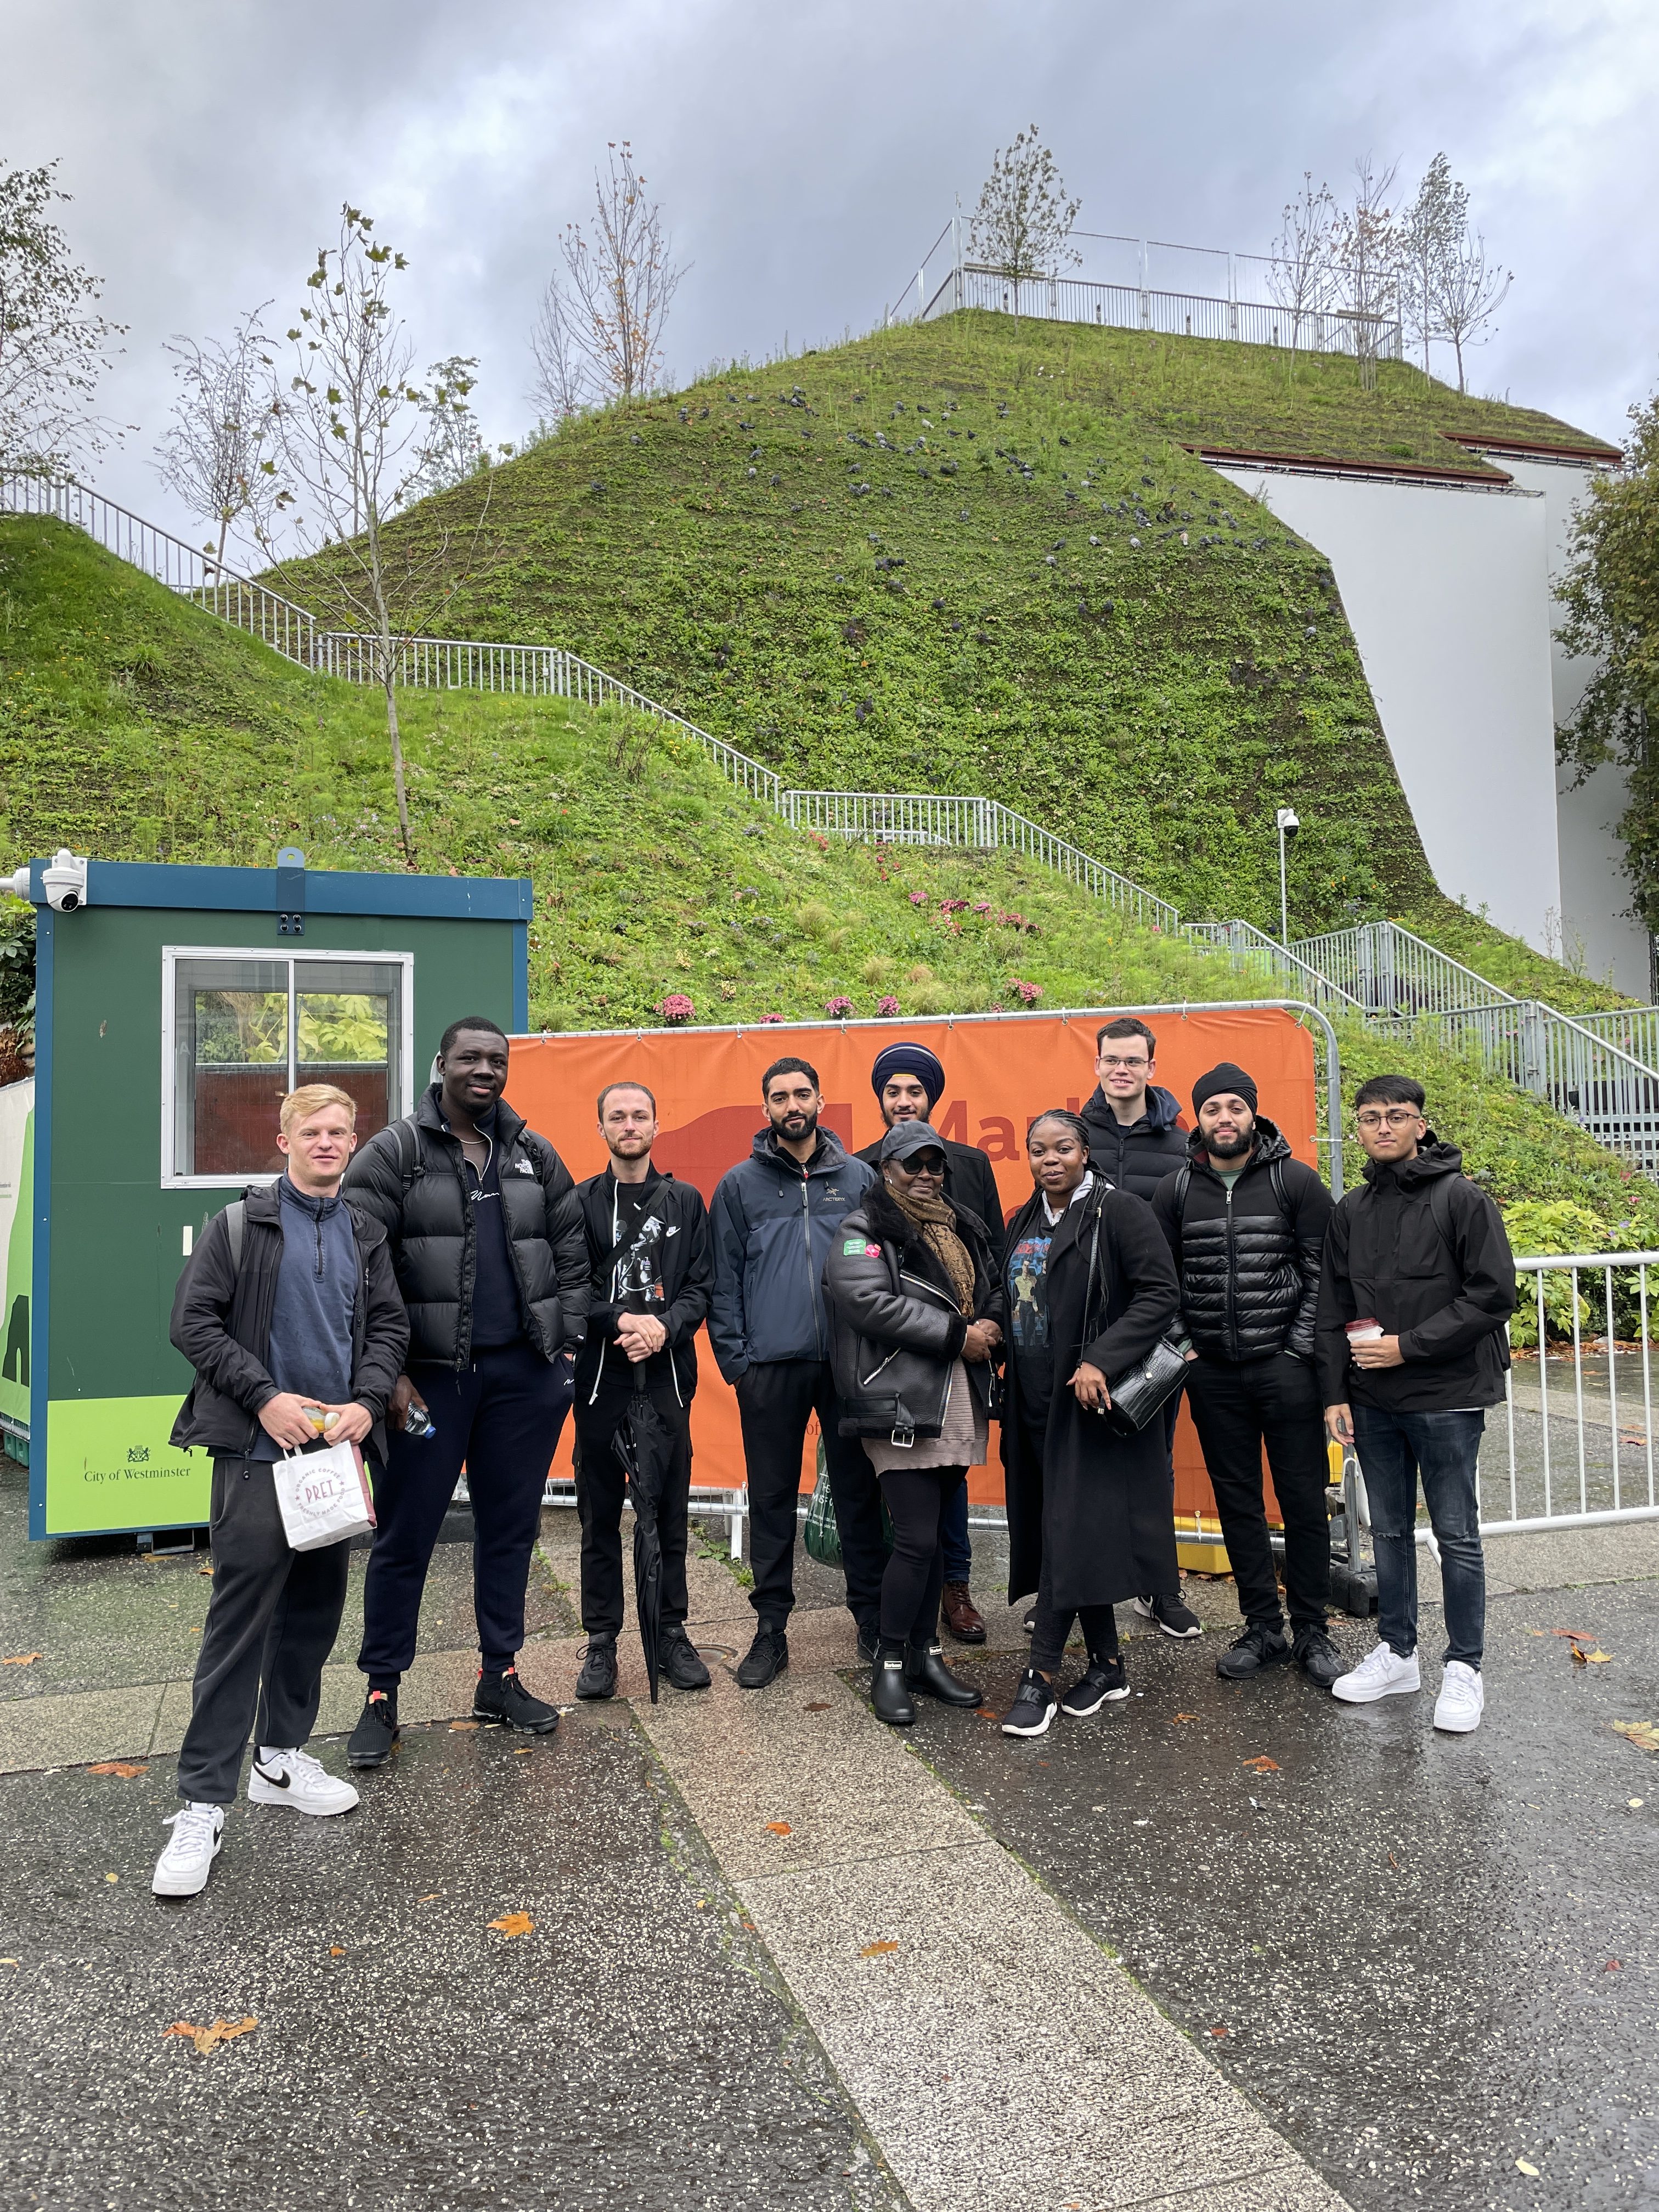 Real Estate BSc Honours students gather for a group photo on a site visit to Marble Arch Mound.